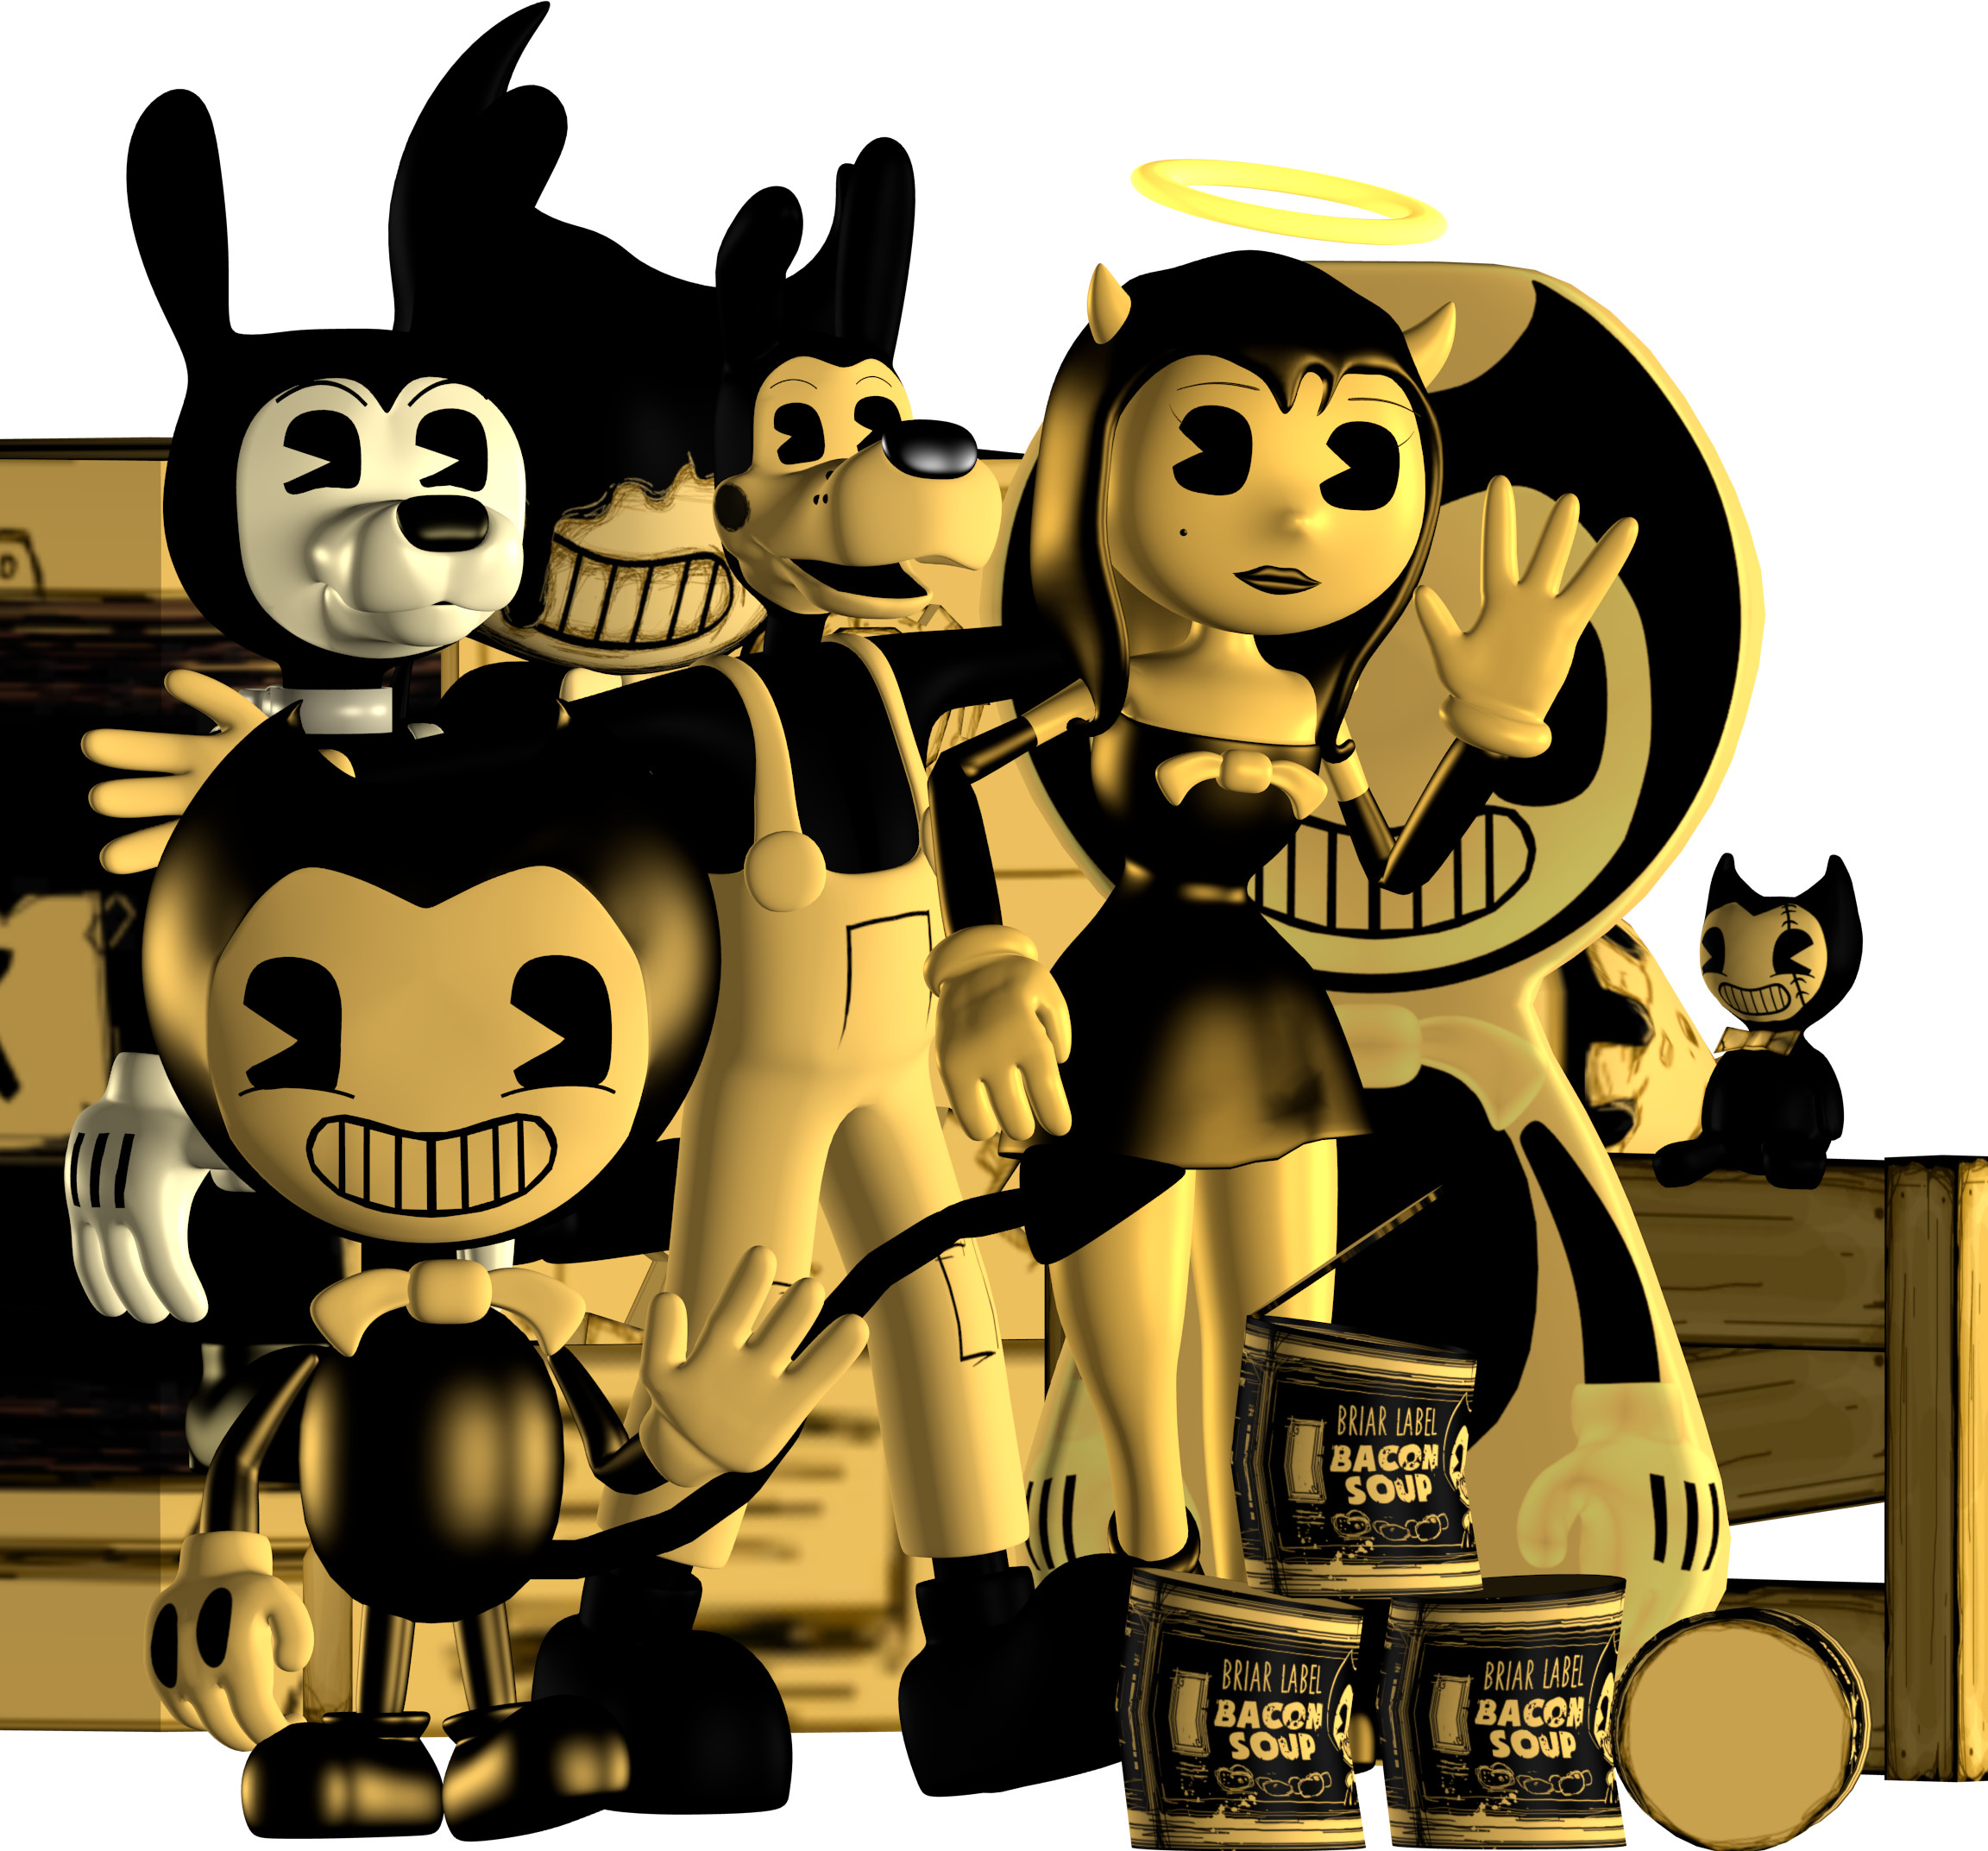 bendy and the ink machine for free download